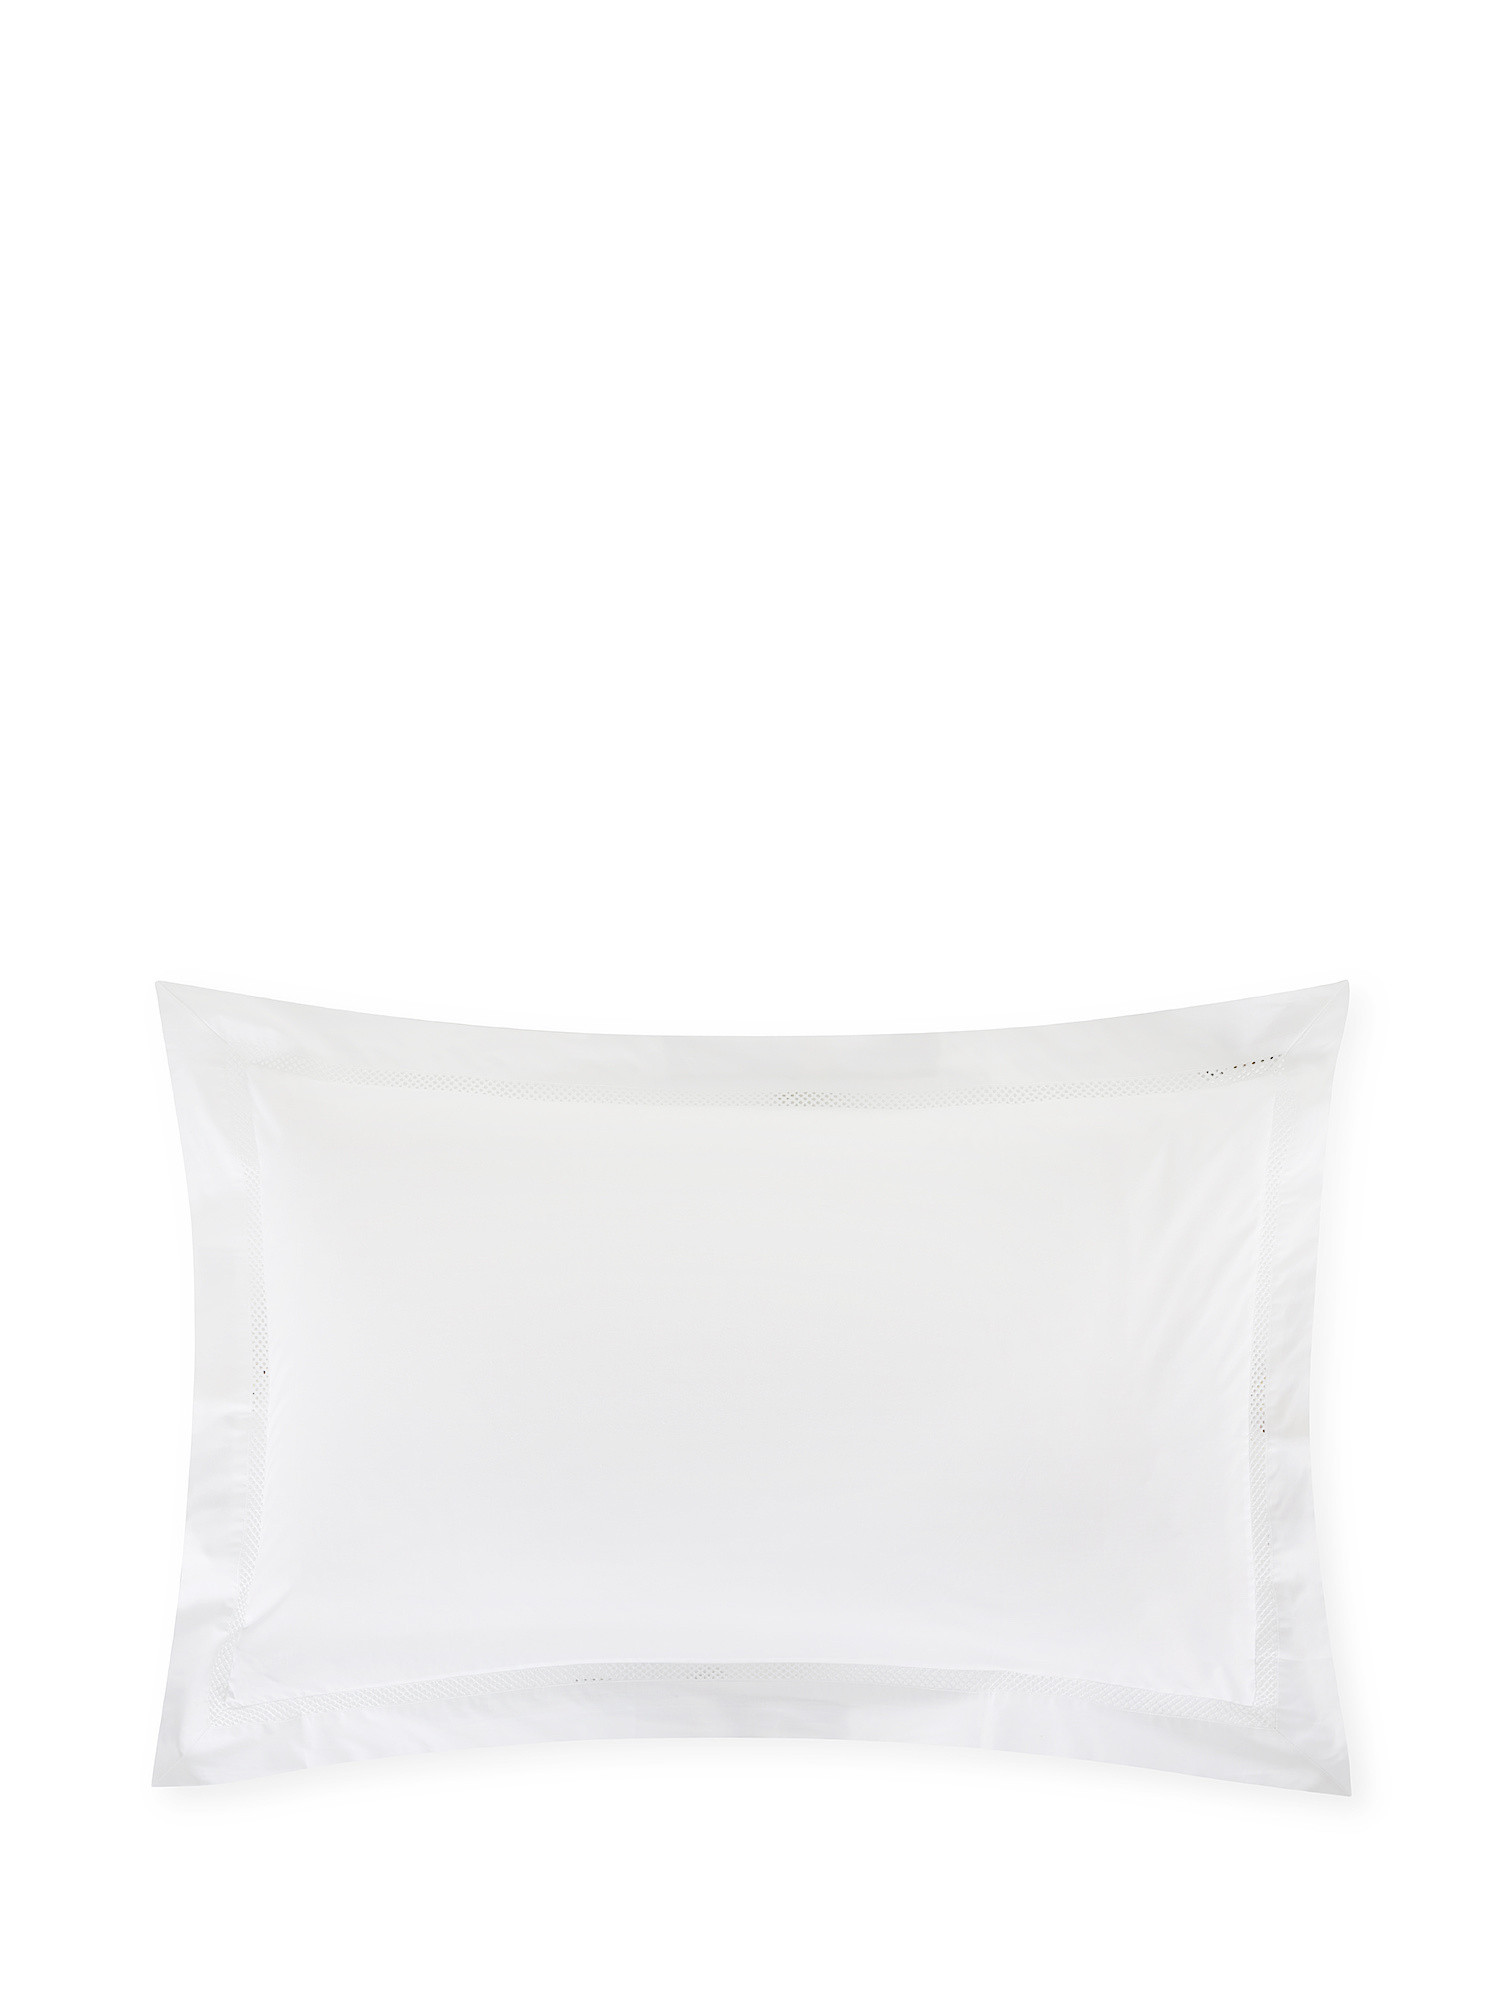 Portofino pillowcase in 100% cotton percale with drawn thread work, White, large image number 0